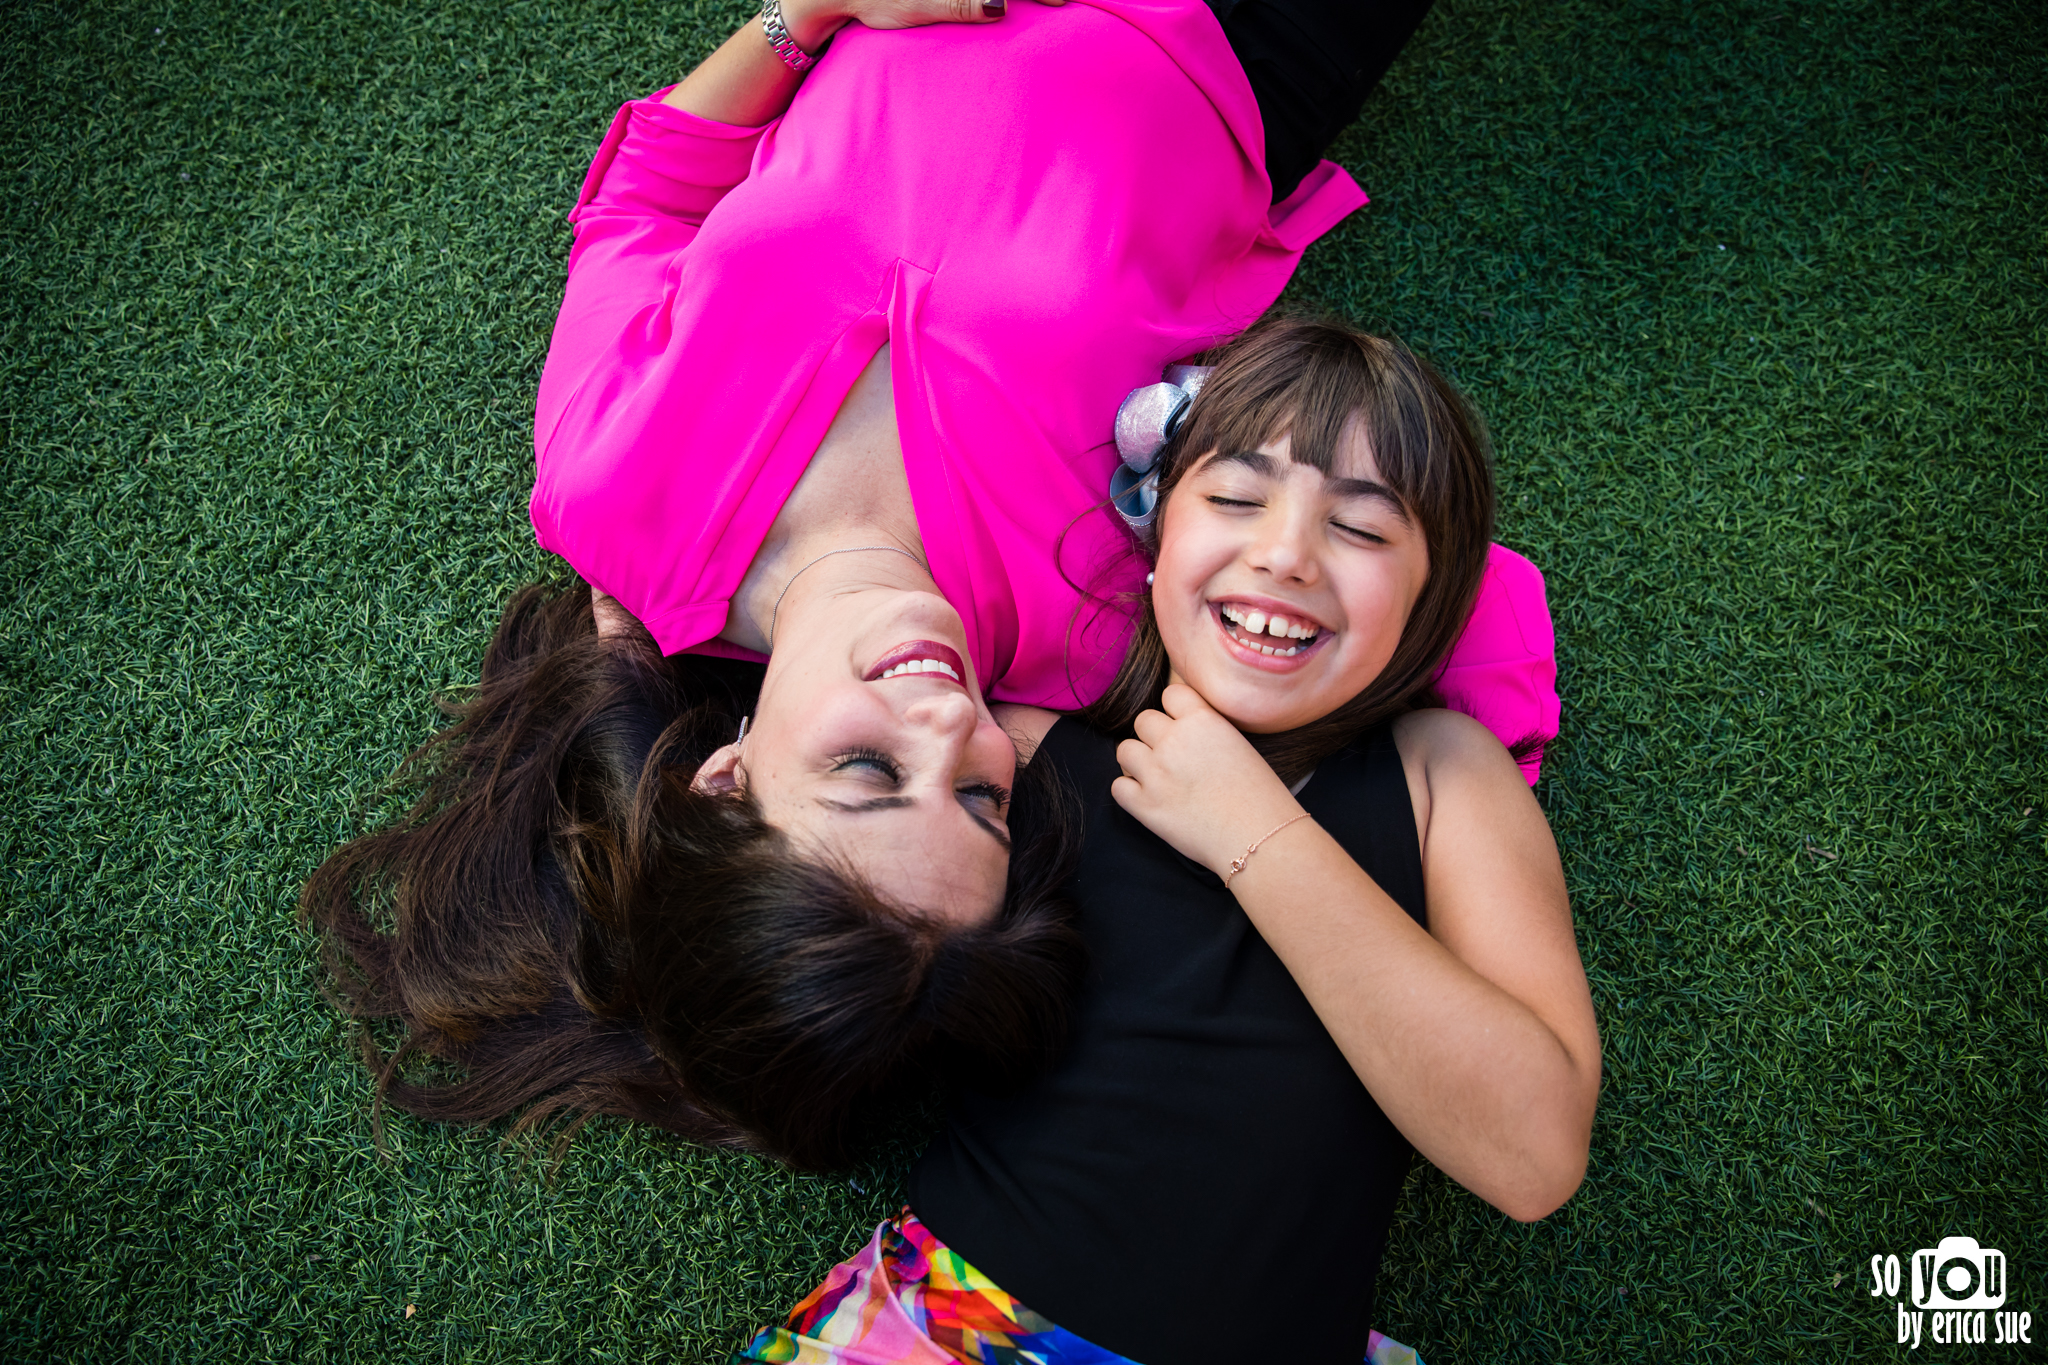 so-you-by-erica-sue-family-photographer-miami-fl-wynwood-mother-daughter-3309.jpg